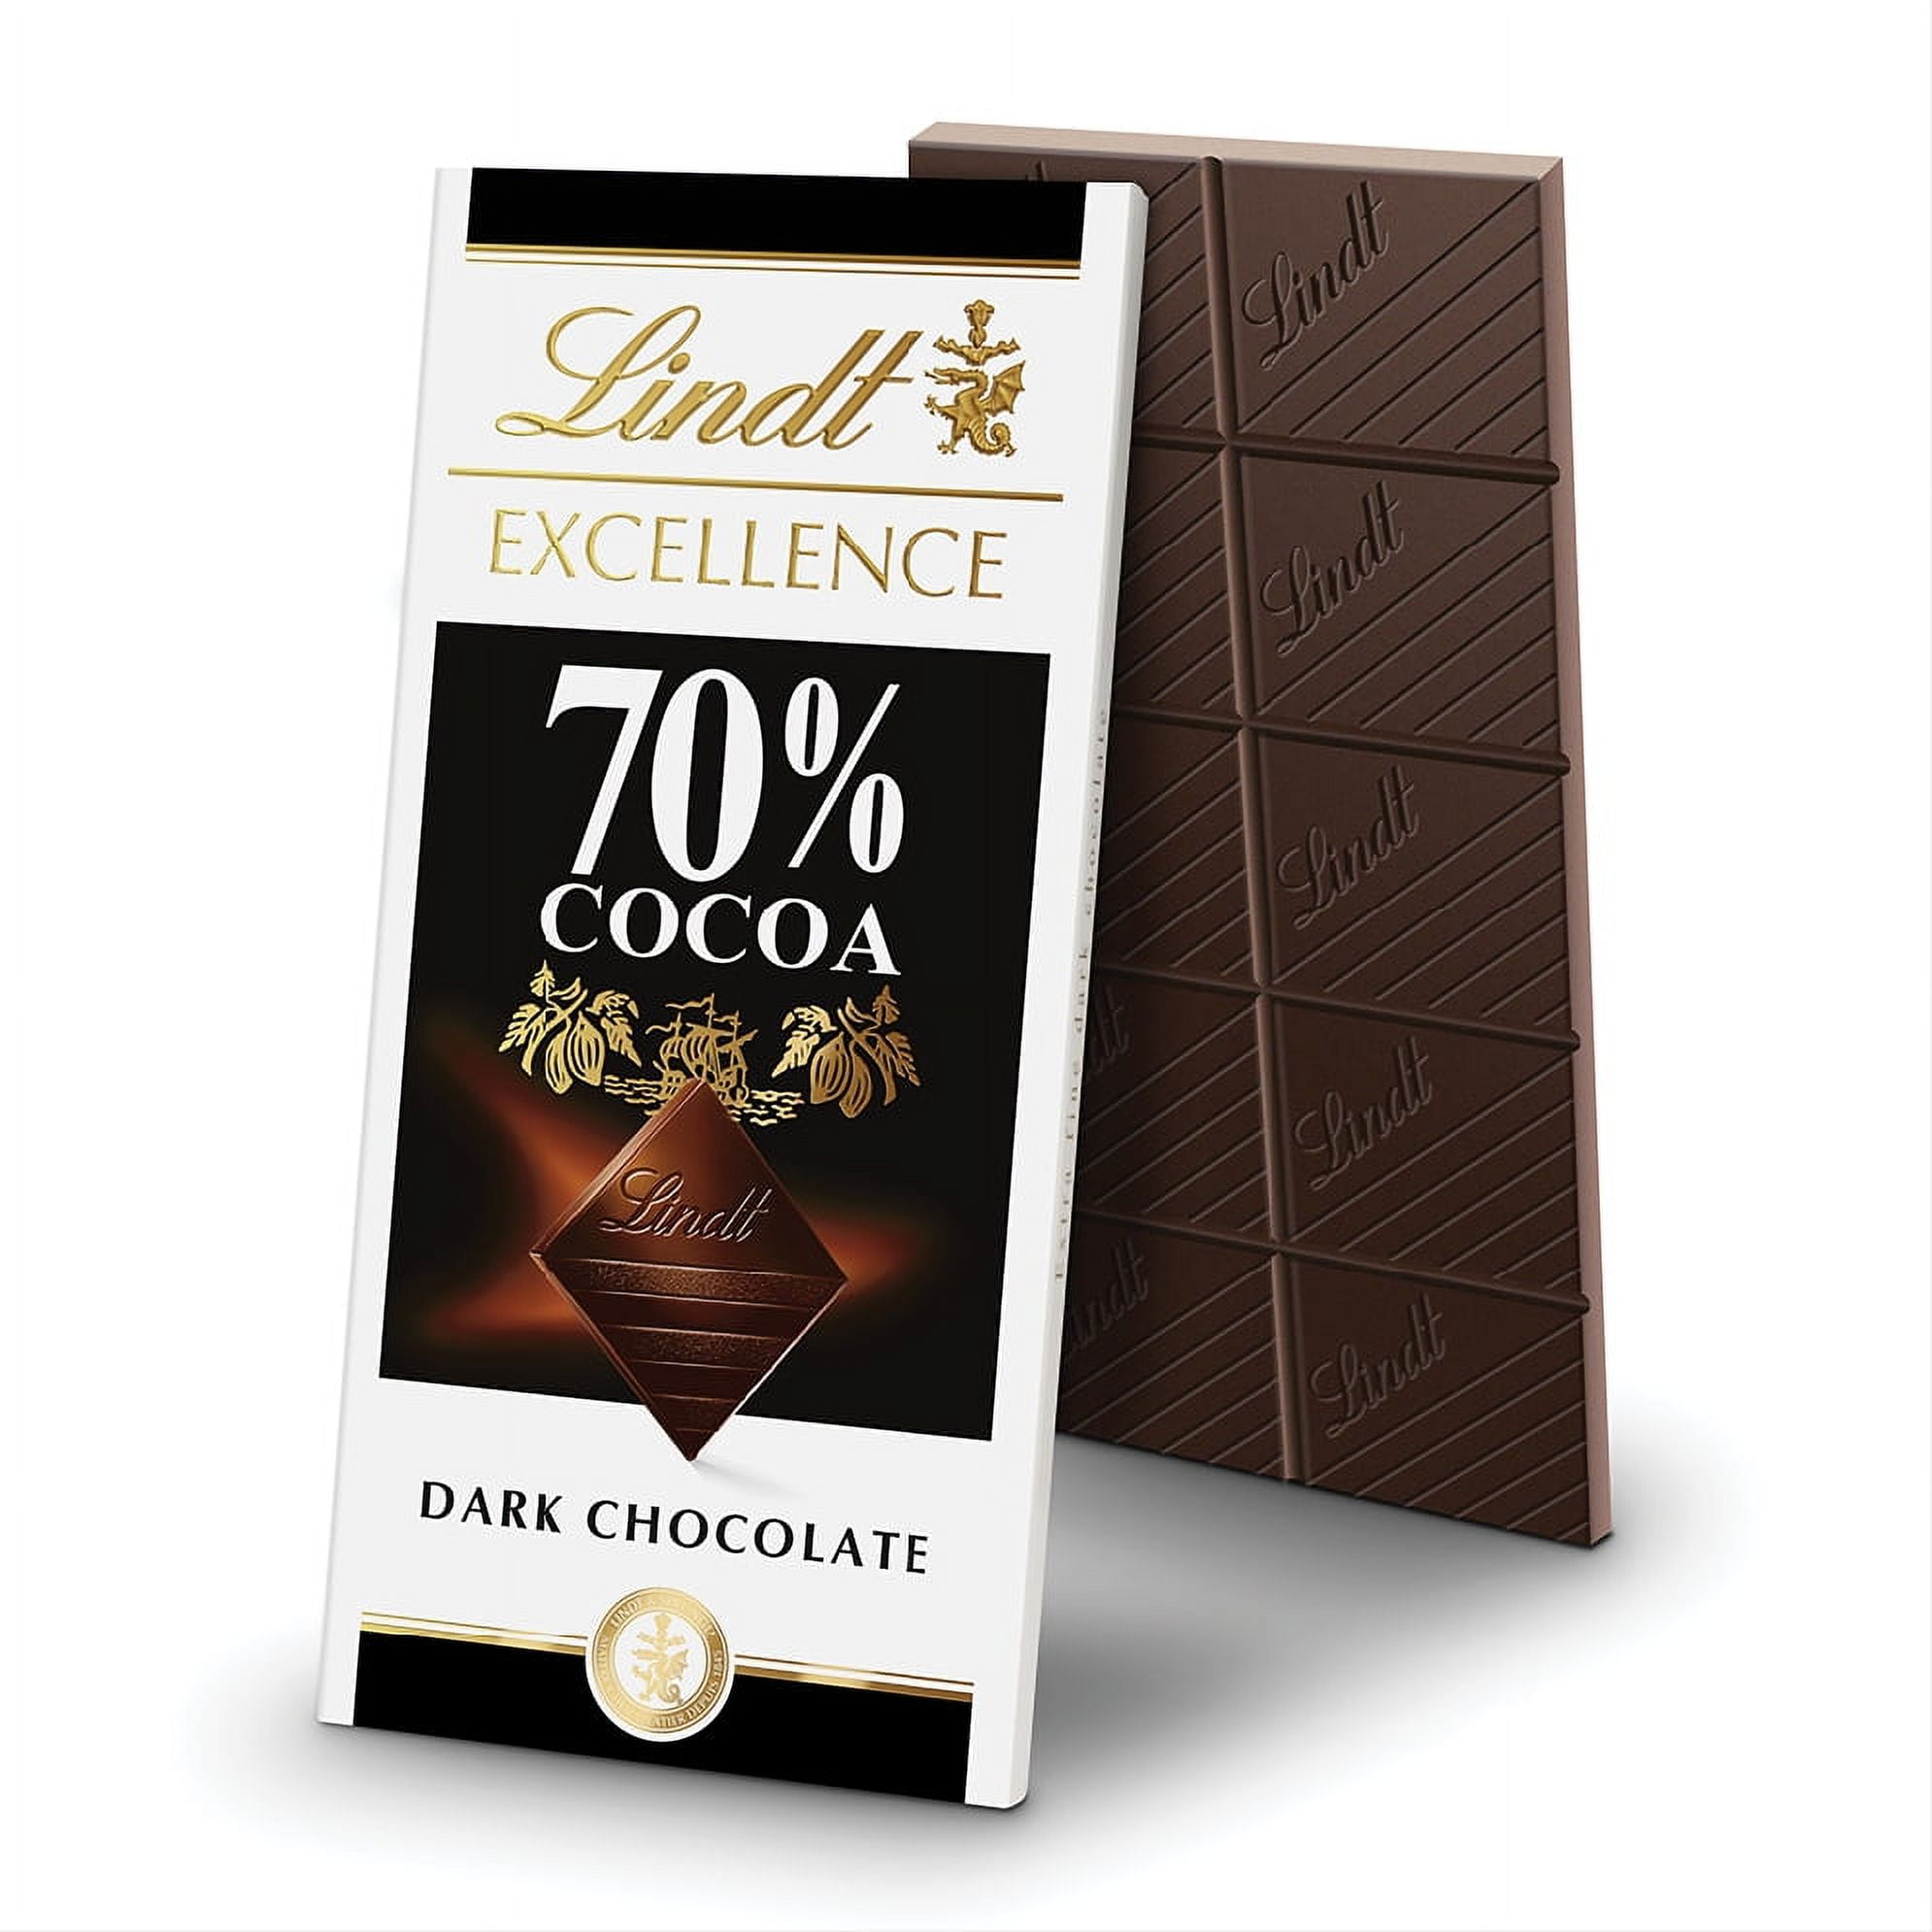 (12 Pack)Lindt Excellence 70% Cocoa Dark Chocolate Candy Bar, 3.5 oz.